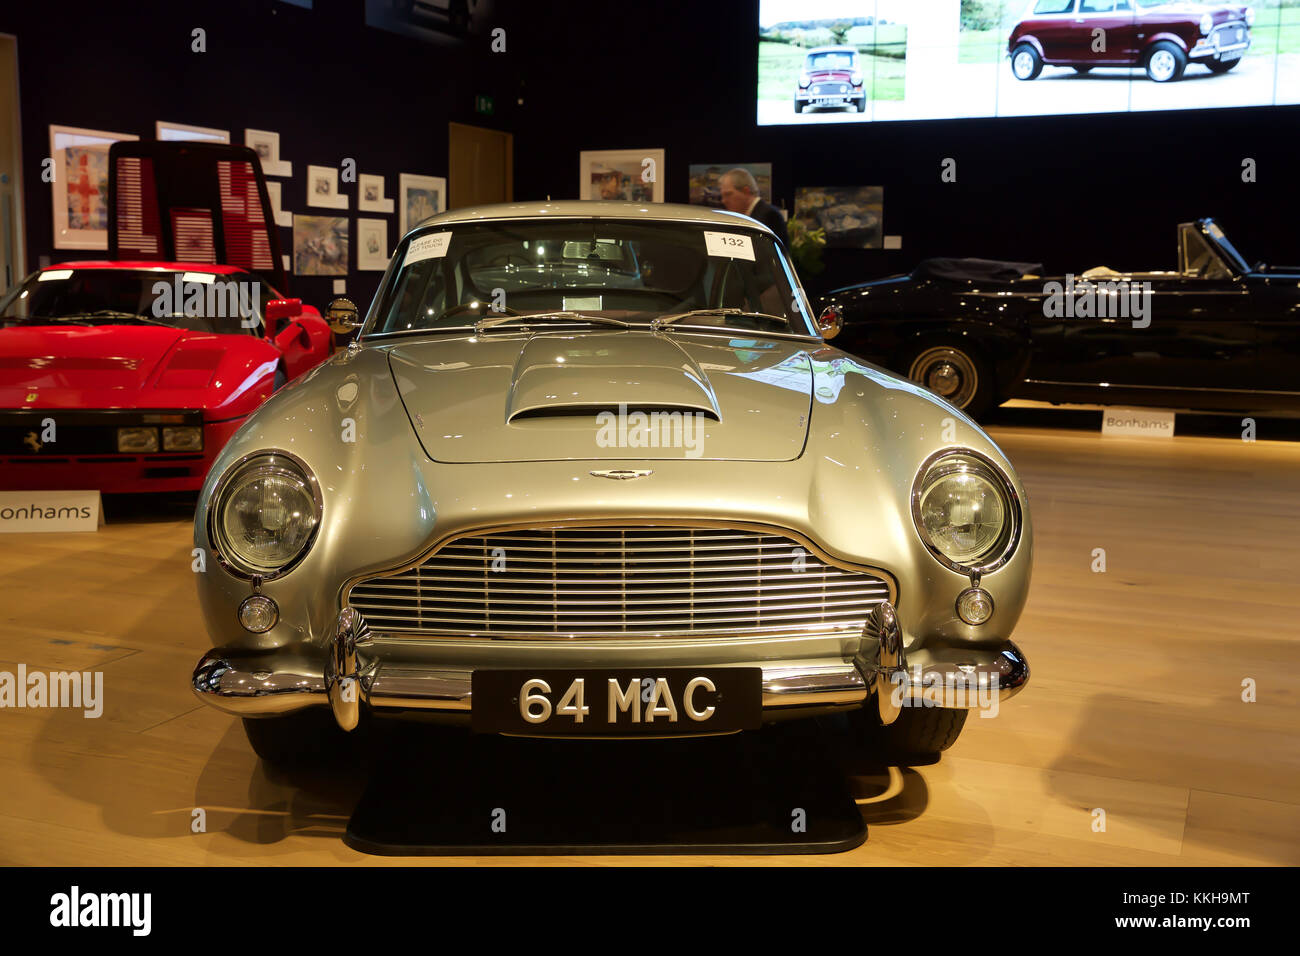 London, UK,1st December 2017, Top Celebrity cars on display at Bonhams in London. Cars include: The ex-Sir Paul McCartney 1964 Aston Martin DB5 Sports Saloon (£1,250,000 - £1,500,000)  Credit: Keith Larby/Alamy Live News Stock Photo